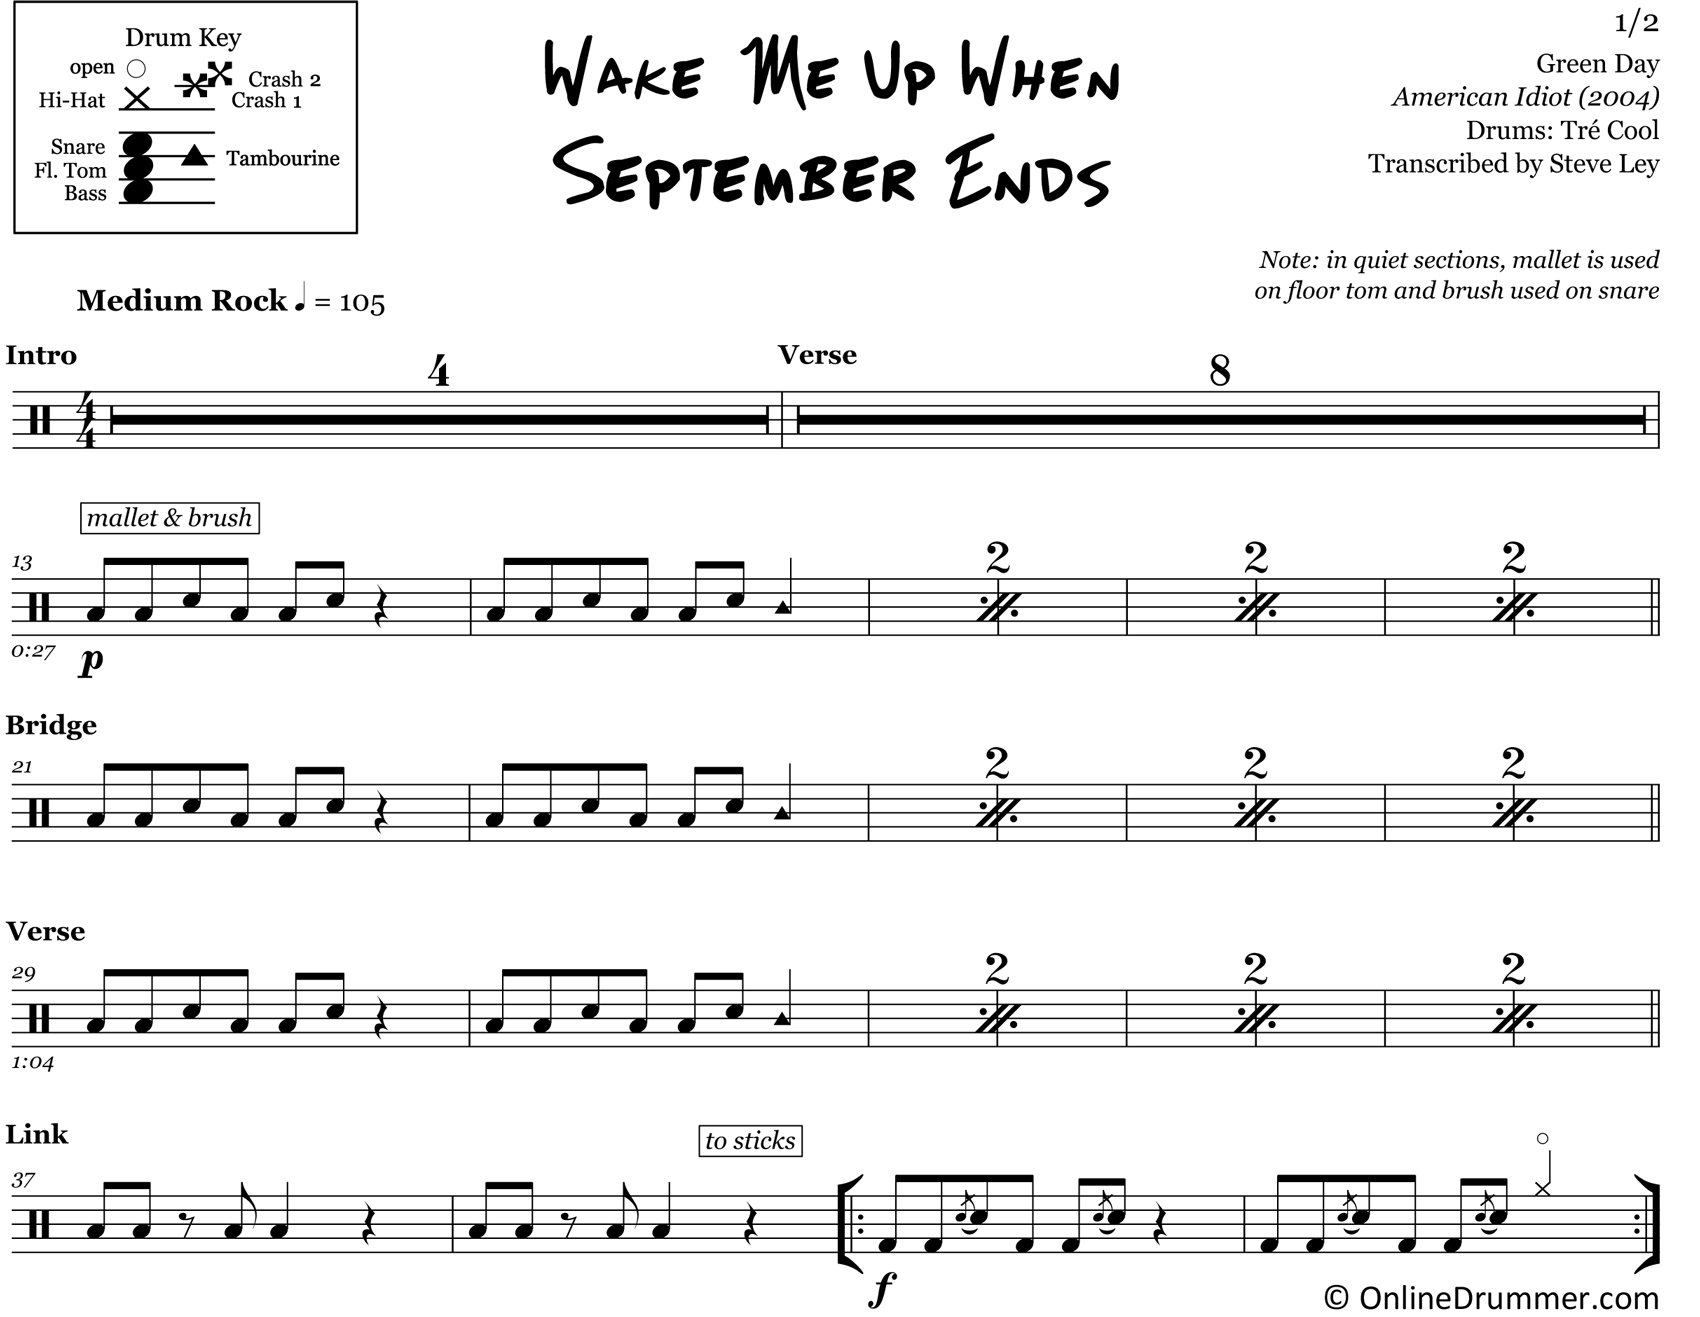 Wake Me Up When September Ends - Green Day - Drum Sheet Music